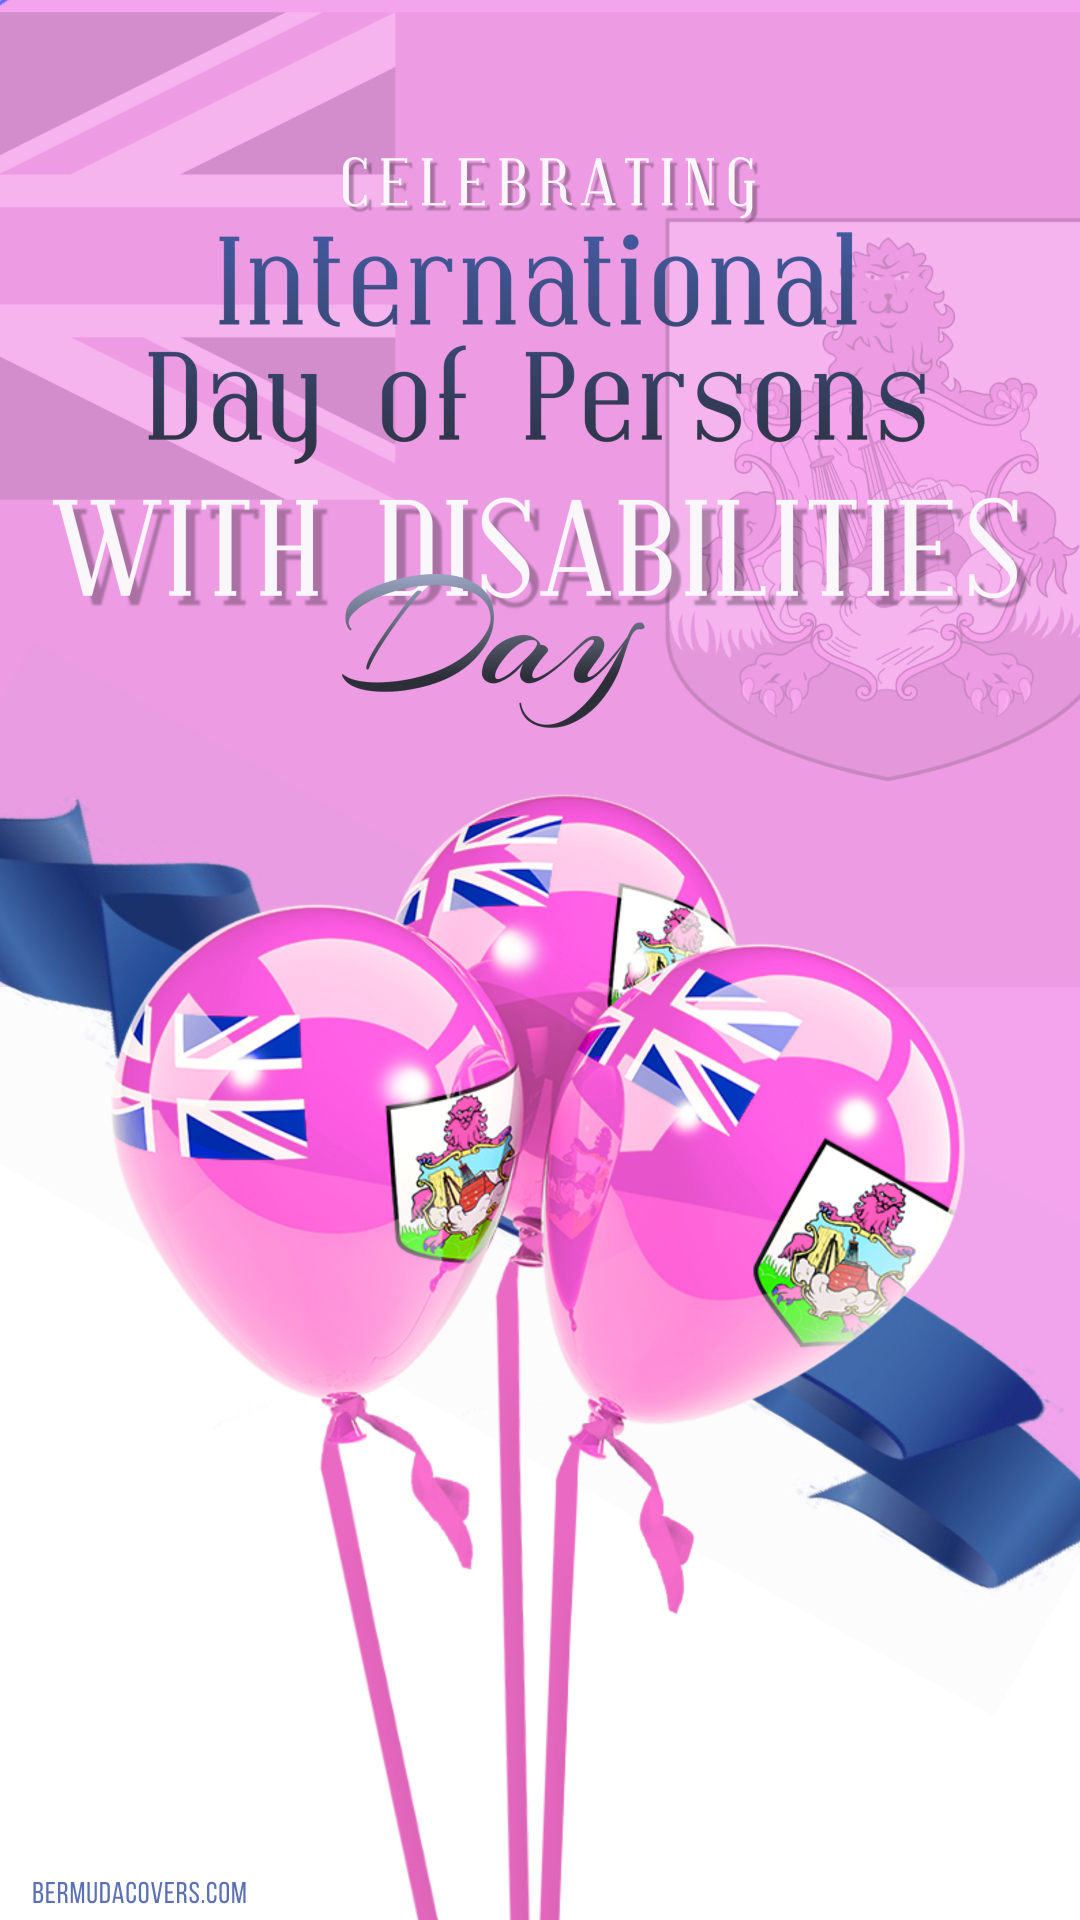 Pink & Blue International Day of Persons with Disabilities Bermuda phone wallpaper image balloon 238432822 (2)